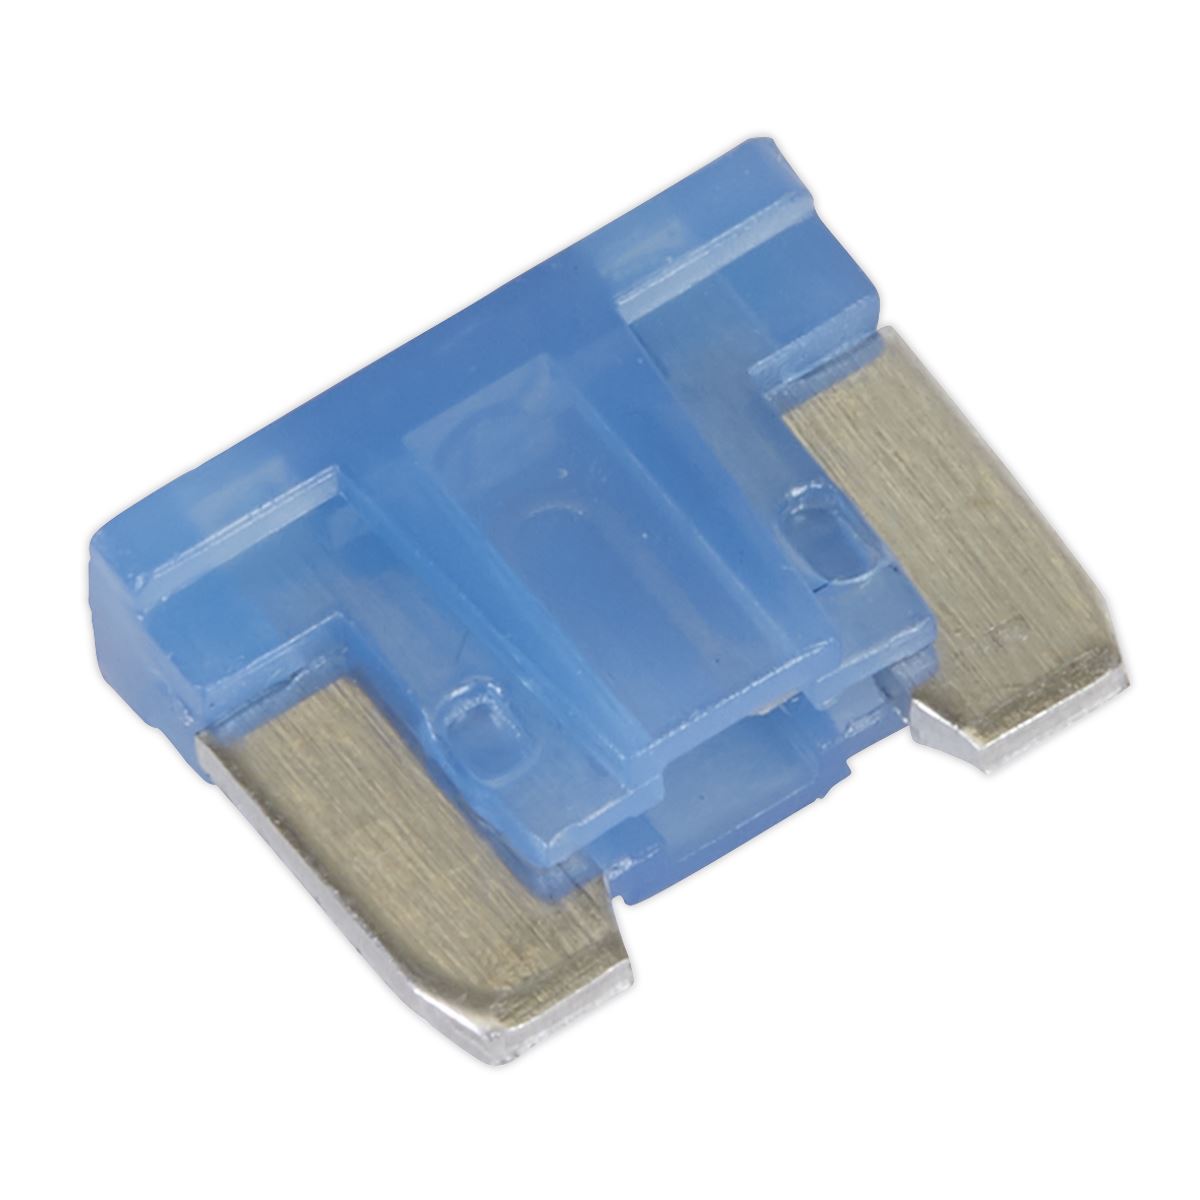 Sealey Automotive MICRO Blade Fuse 15A - Pack of 50